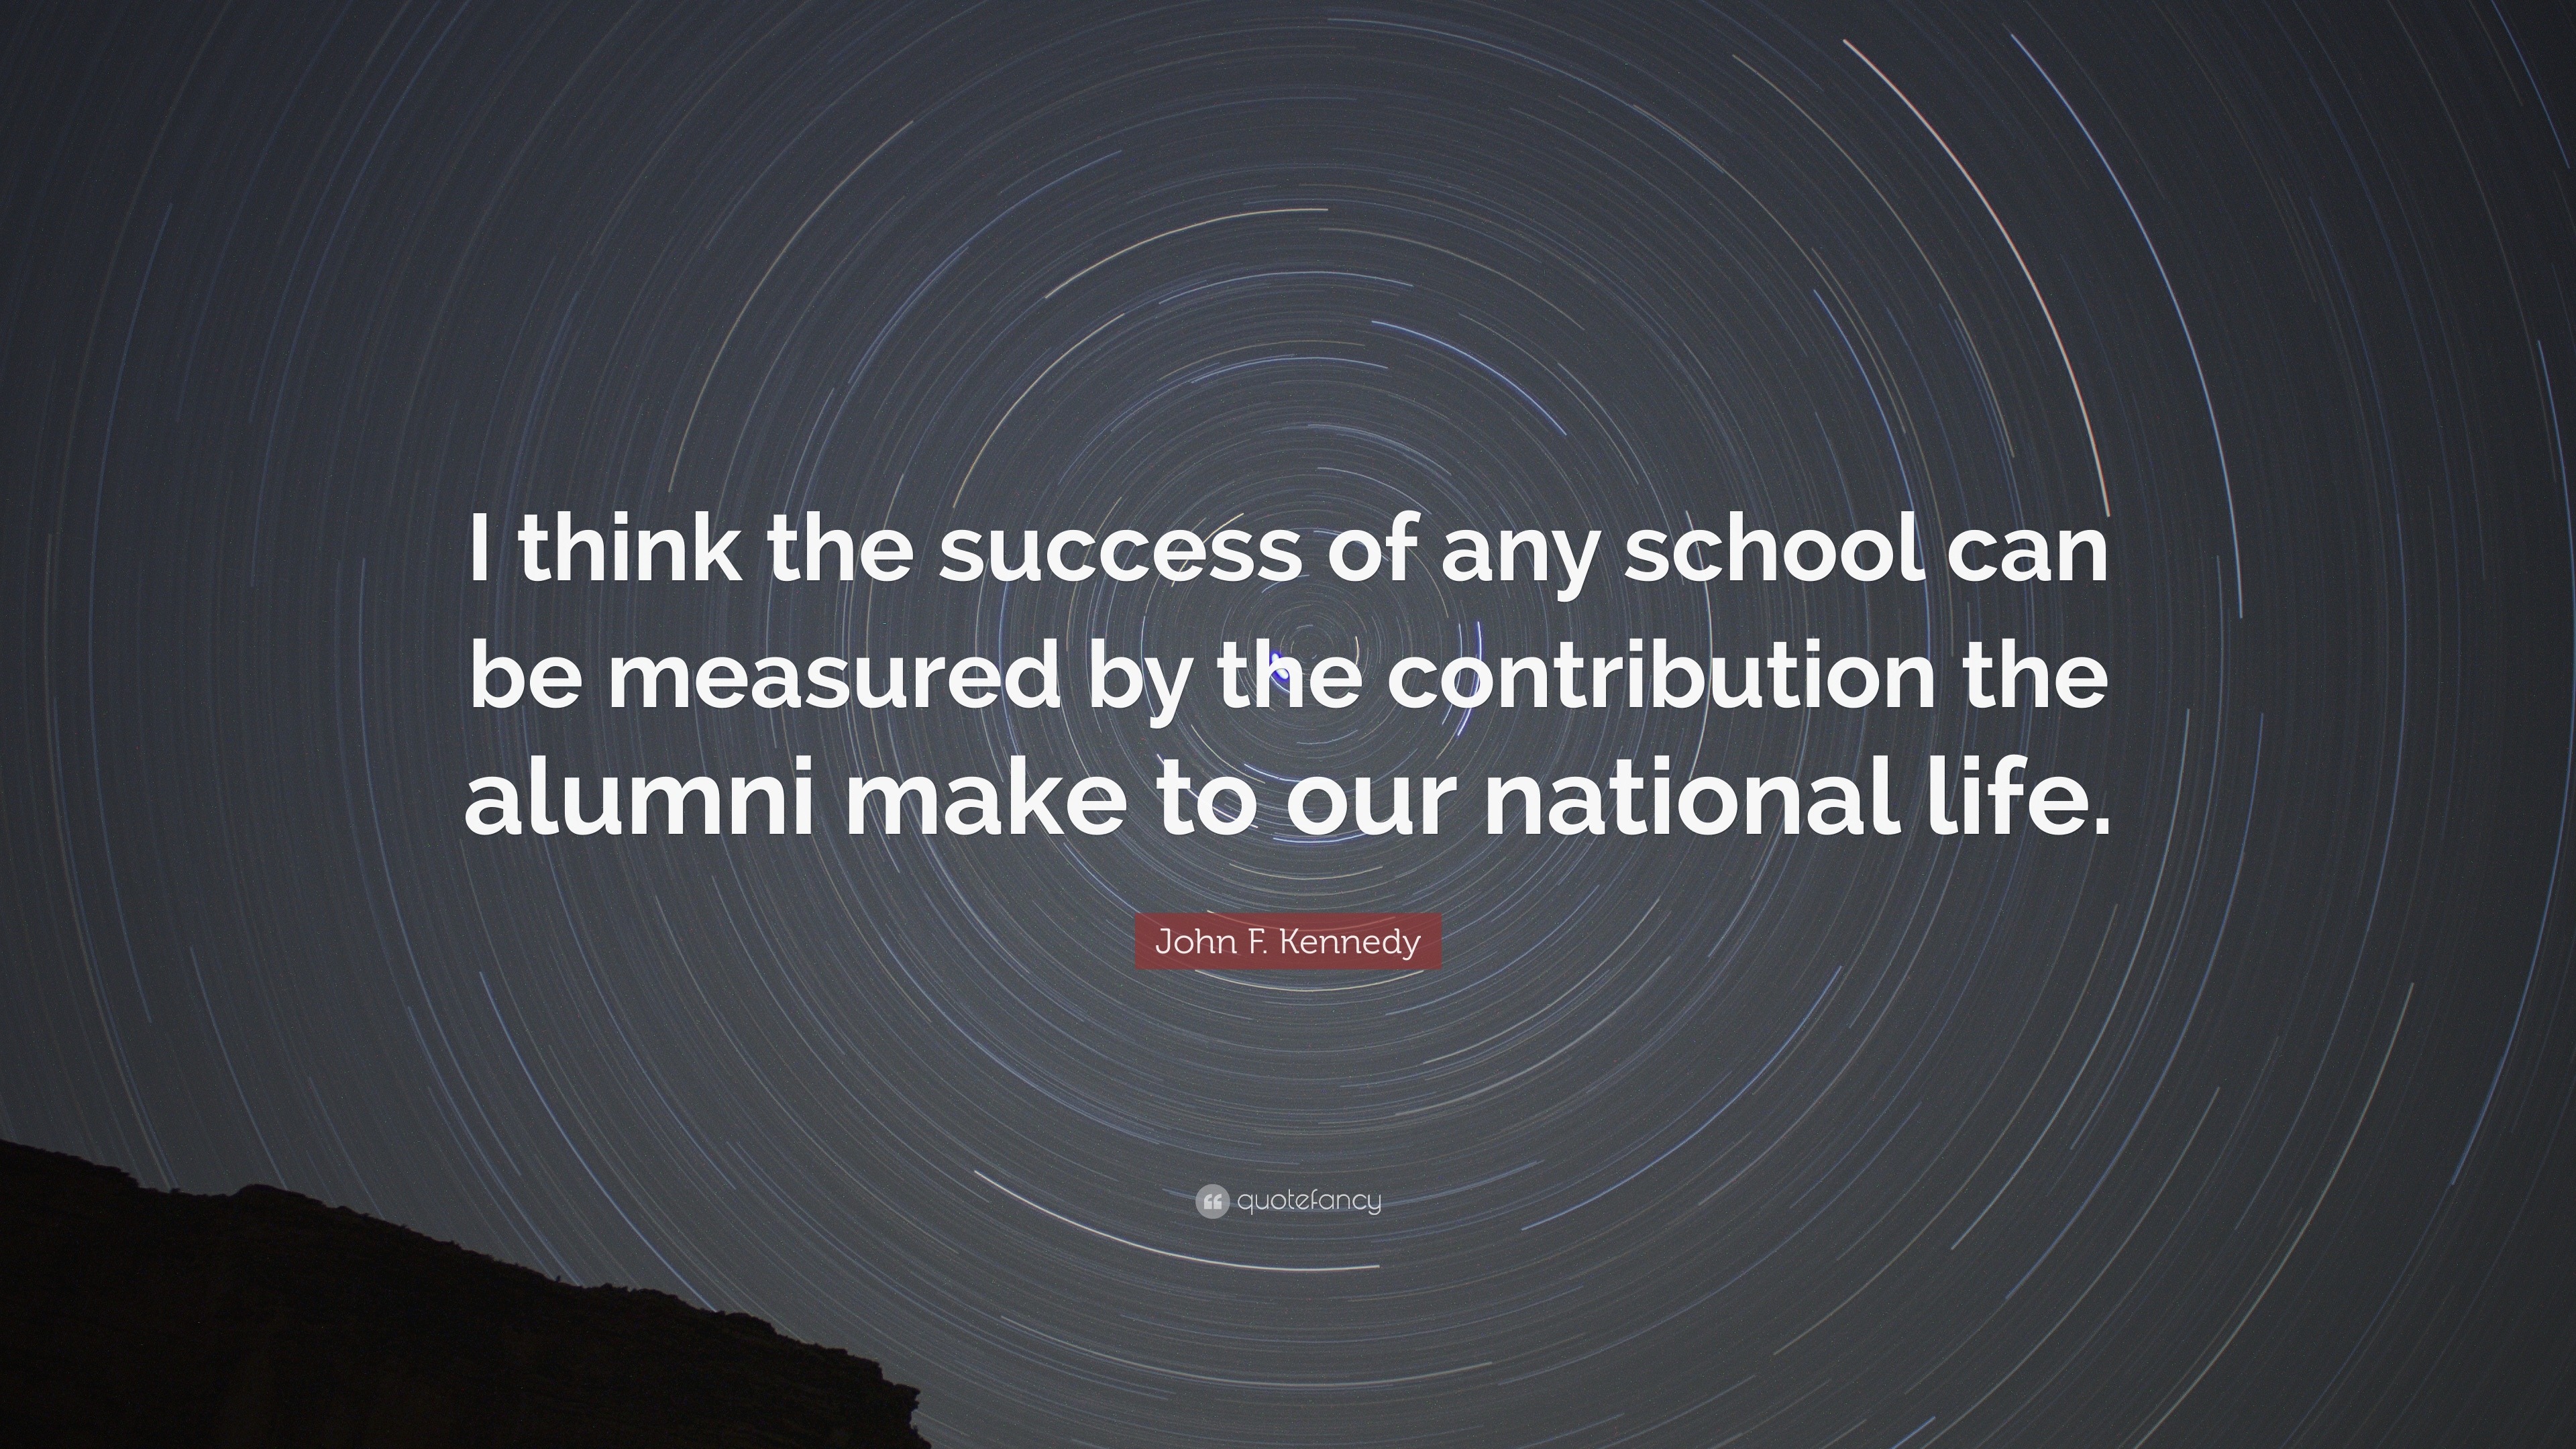 John F. Kennedy Quote: “I think the success of any school can be measured  by the